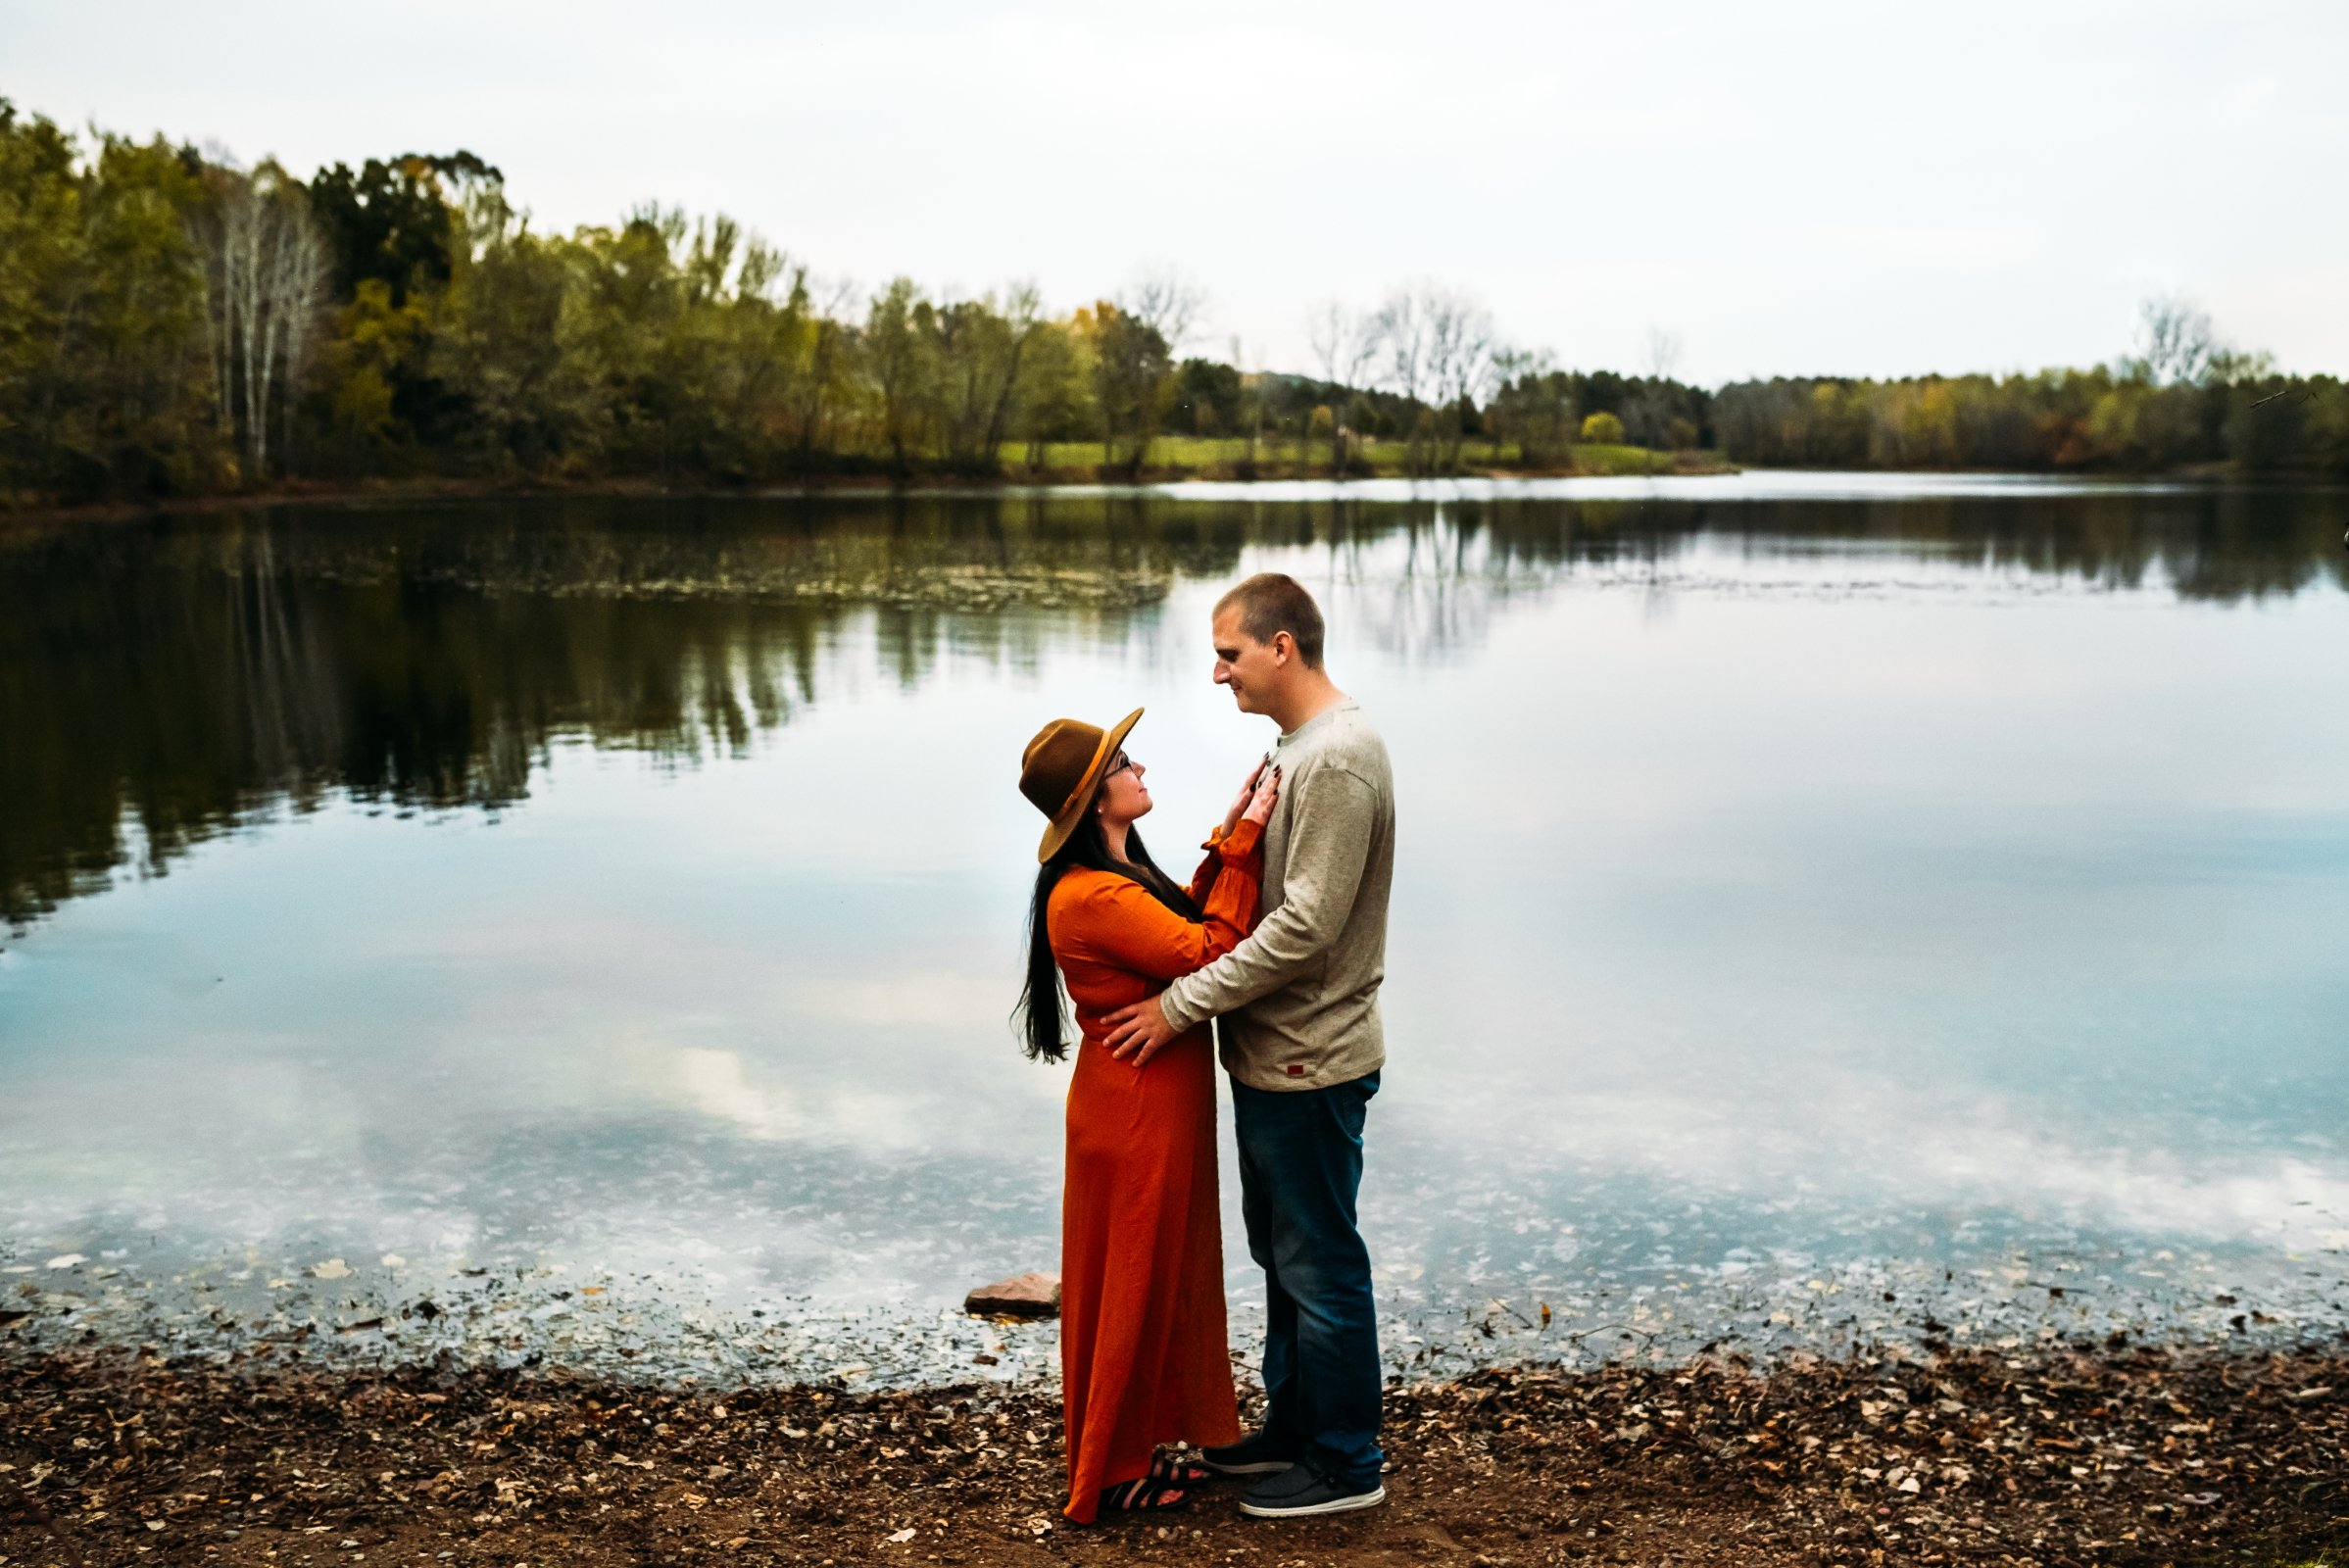 engagement, Wisconsin engagement Photographer, Wausau, Green Bay, Milwaukee, Madison, Minocqua, Door County, What to Wear Photos, unique engagement photos  (Copy) (Copy)